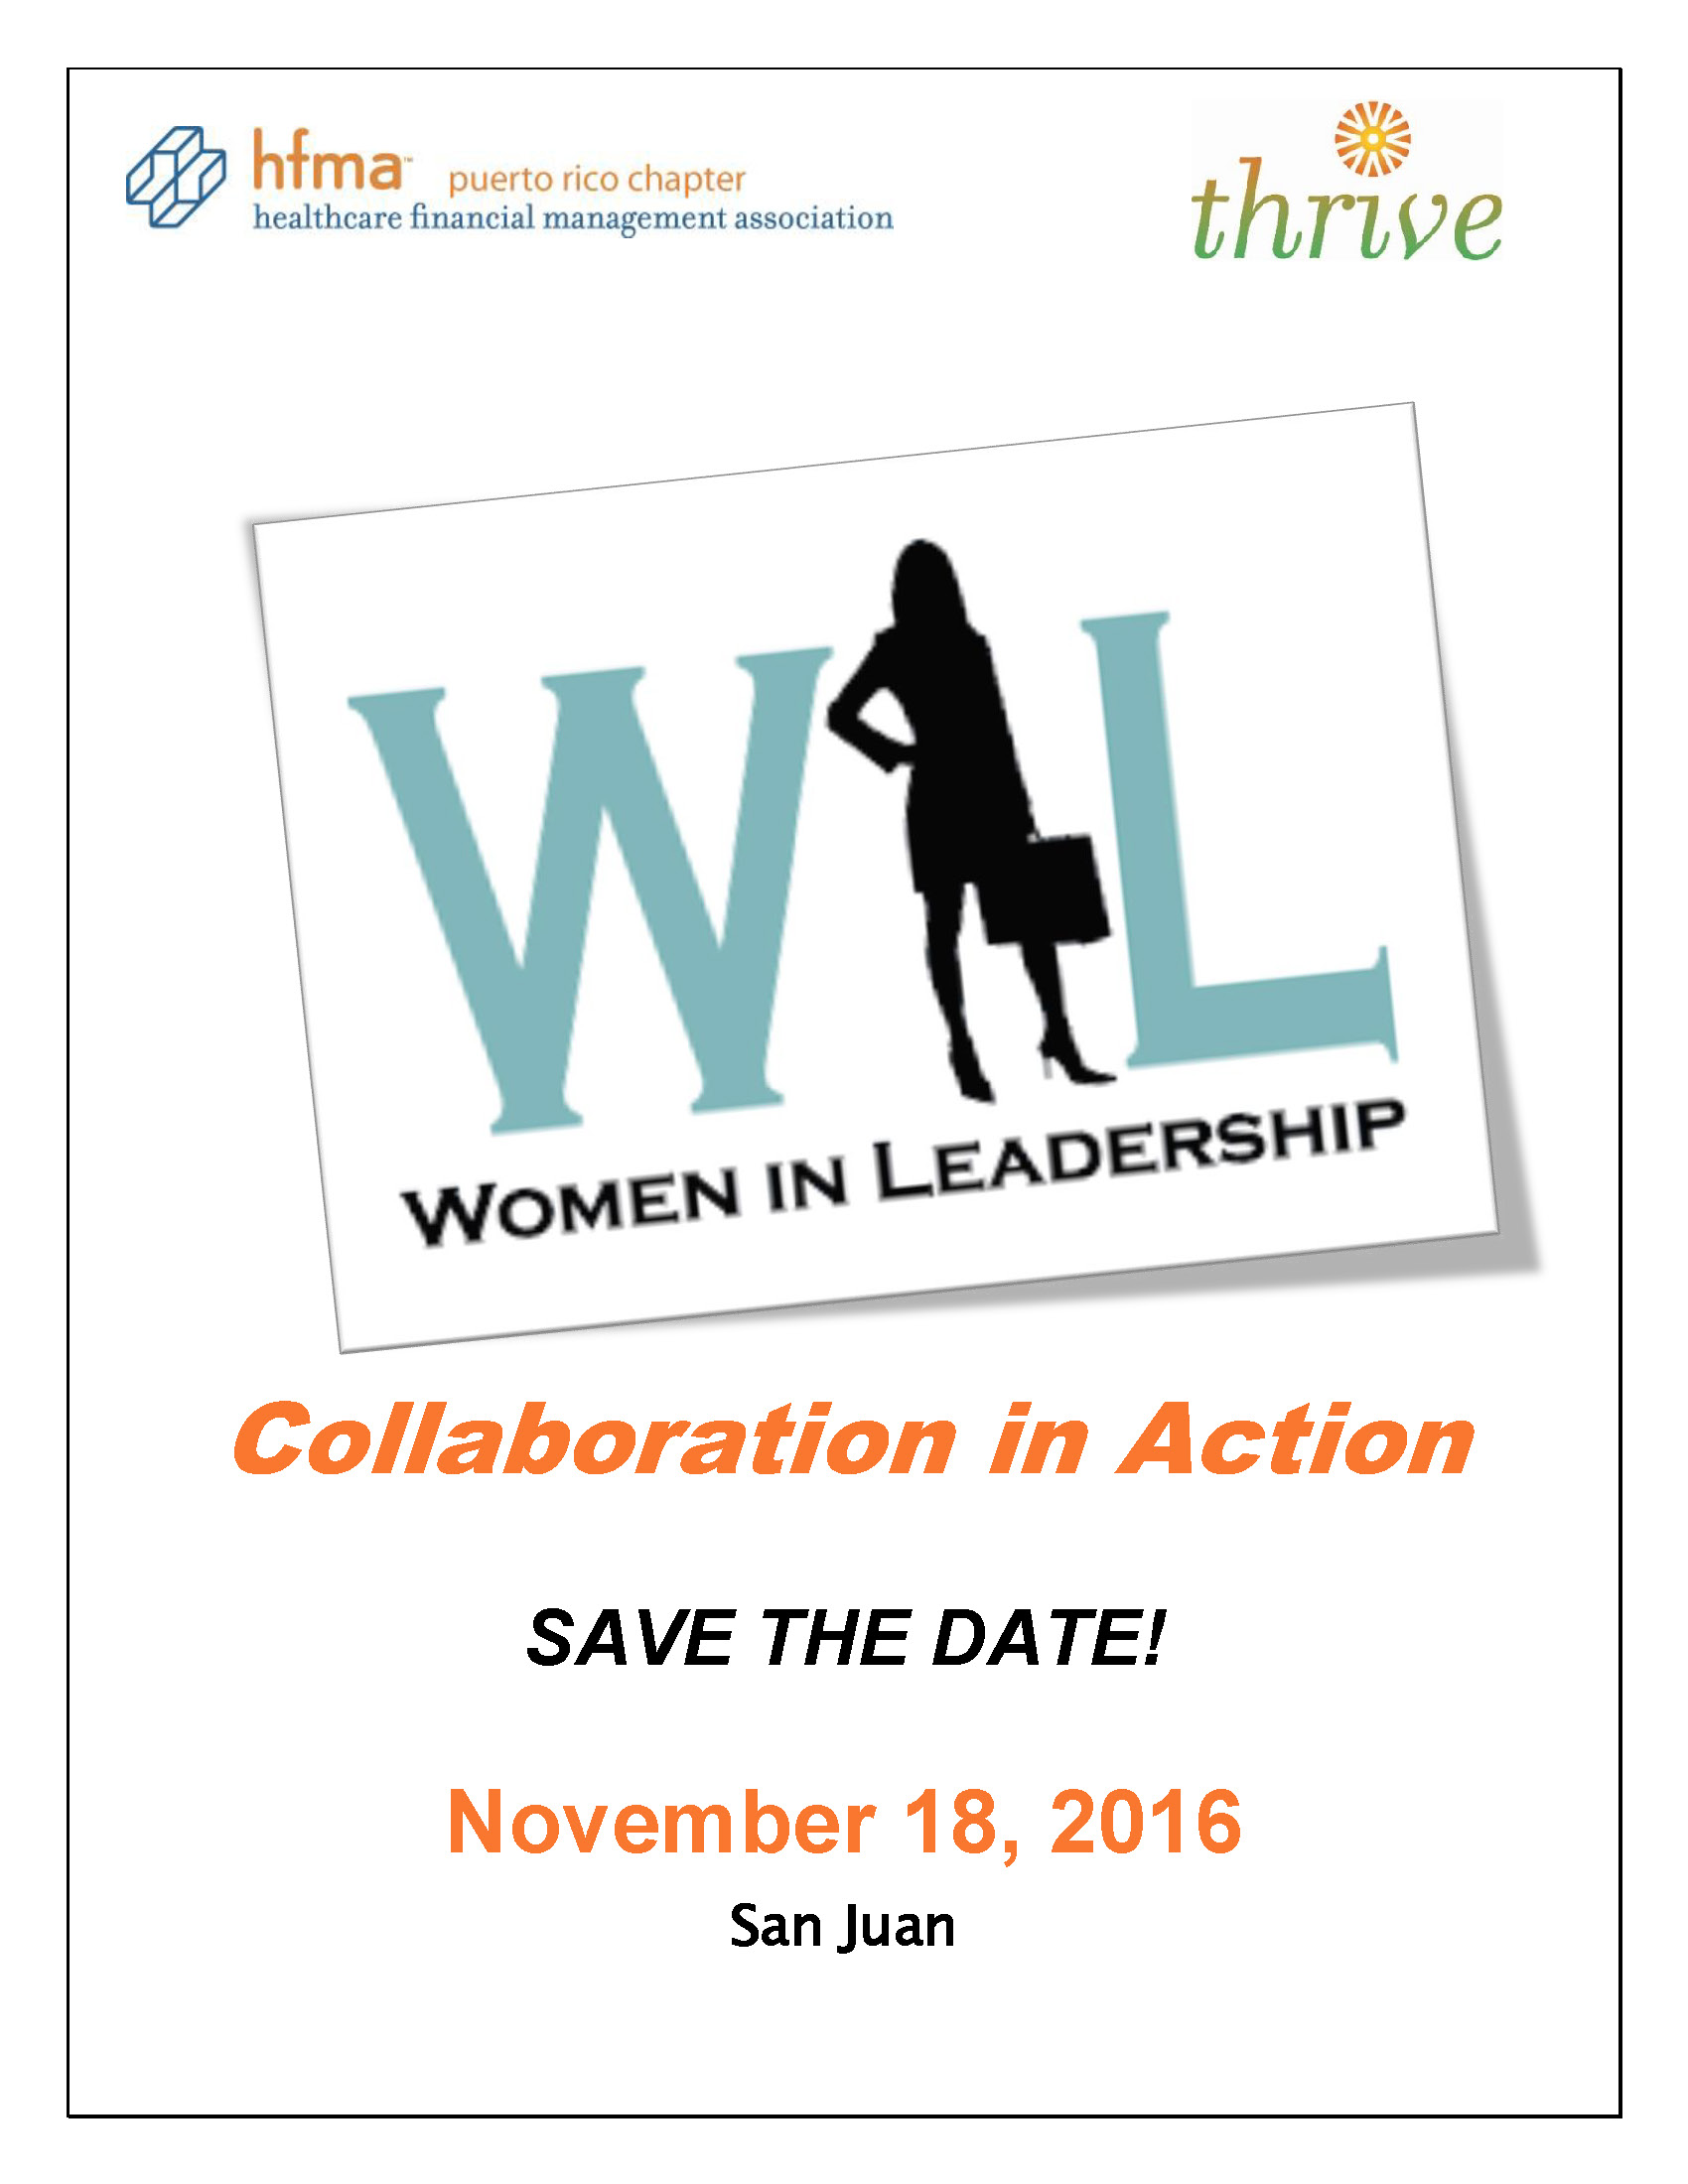 SAVE THE DATE WOMAN IN LEADERSHIP